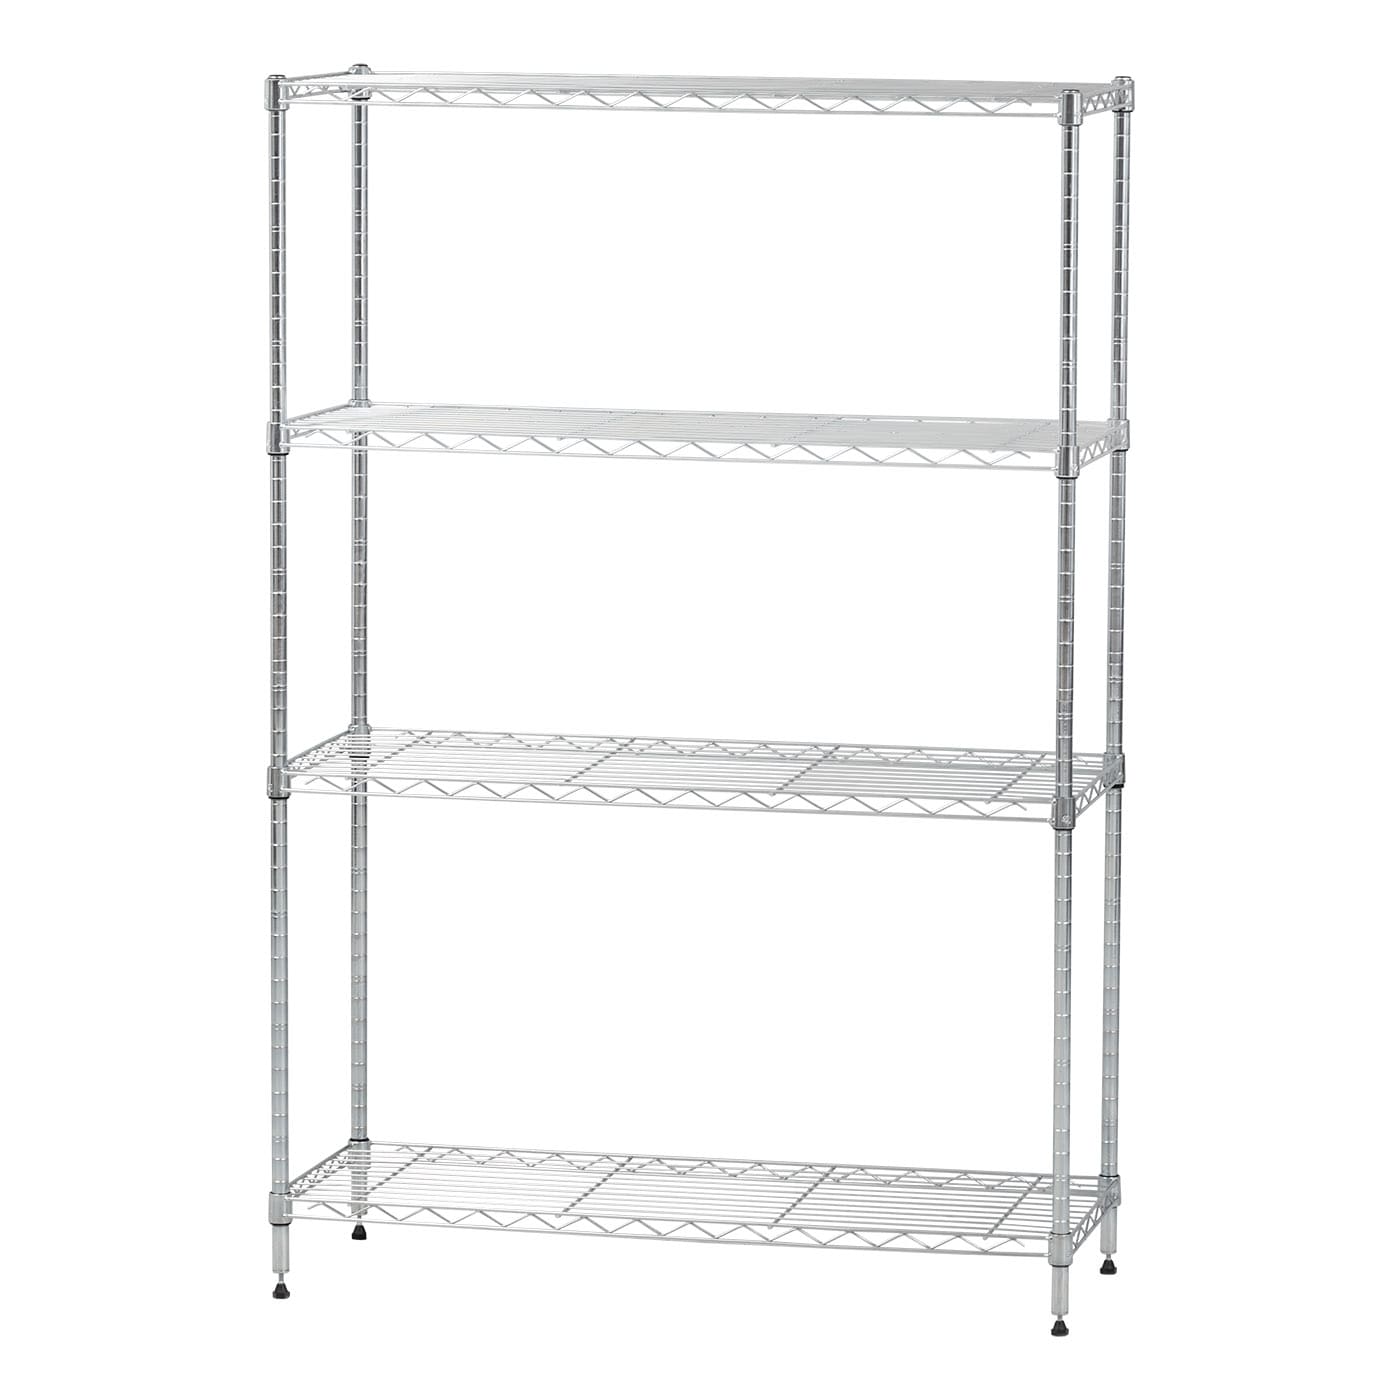 1/Pack Stainless Steel Wire Shelf, 54W x 14D